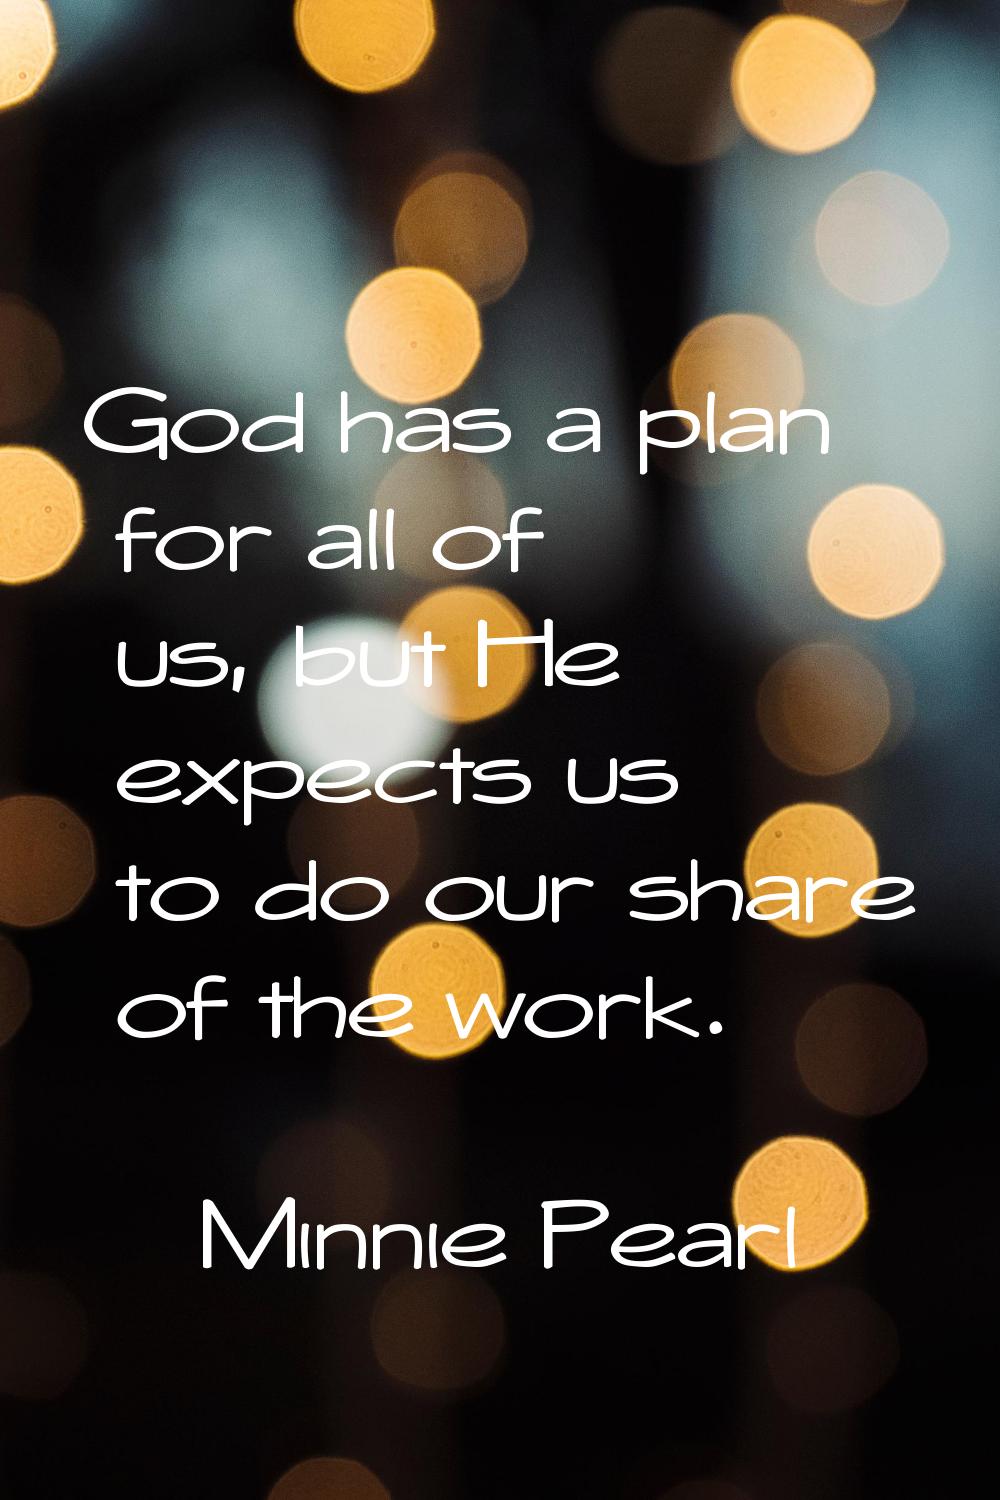 God has a plan for all of us, but He expects us to do our share of the work.